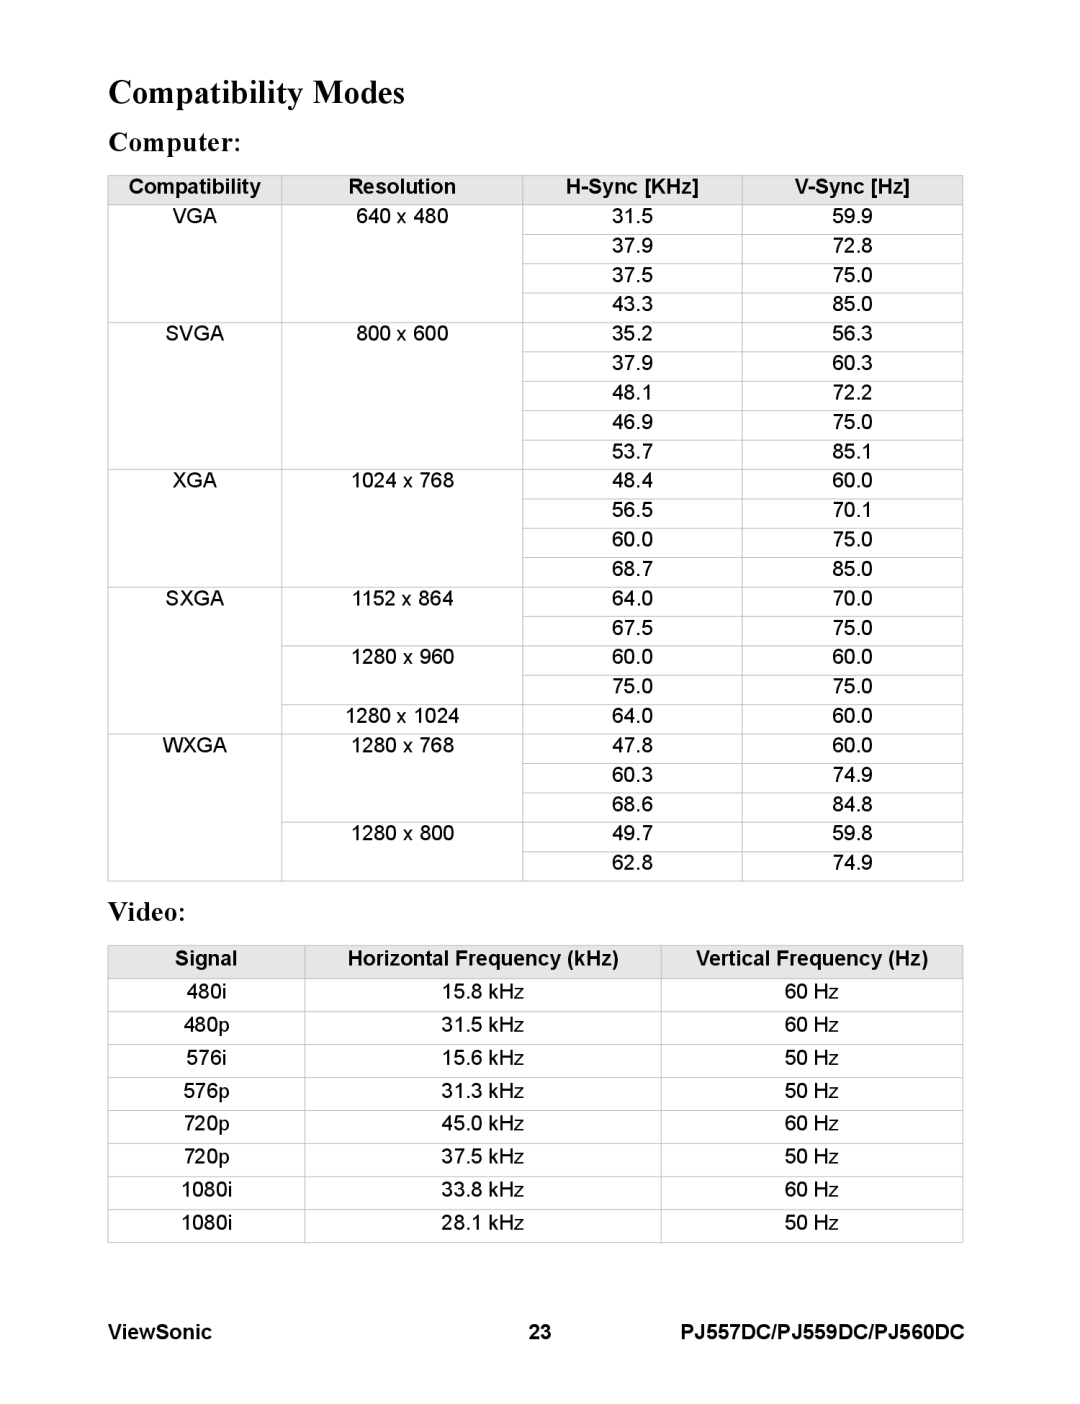 ViewSonic VS11949 Compatibility Modes, Computer, Video, V-Sync Hz, Signal, Horizontal Frequency kHz, Vertical Frequency Hz 